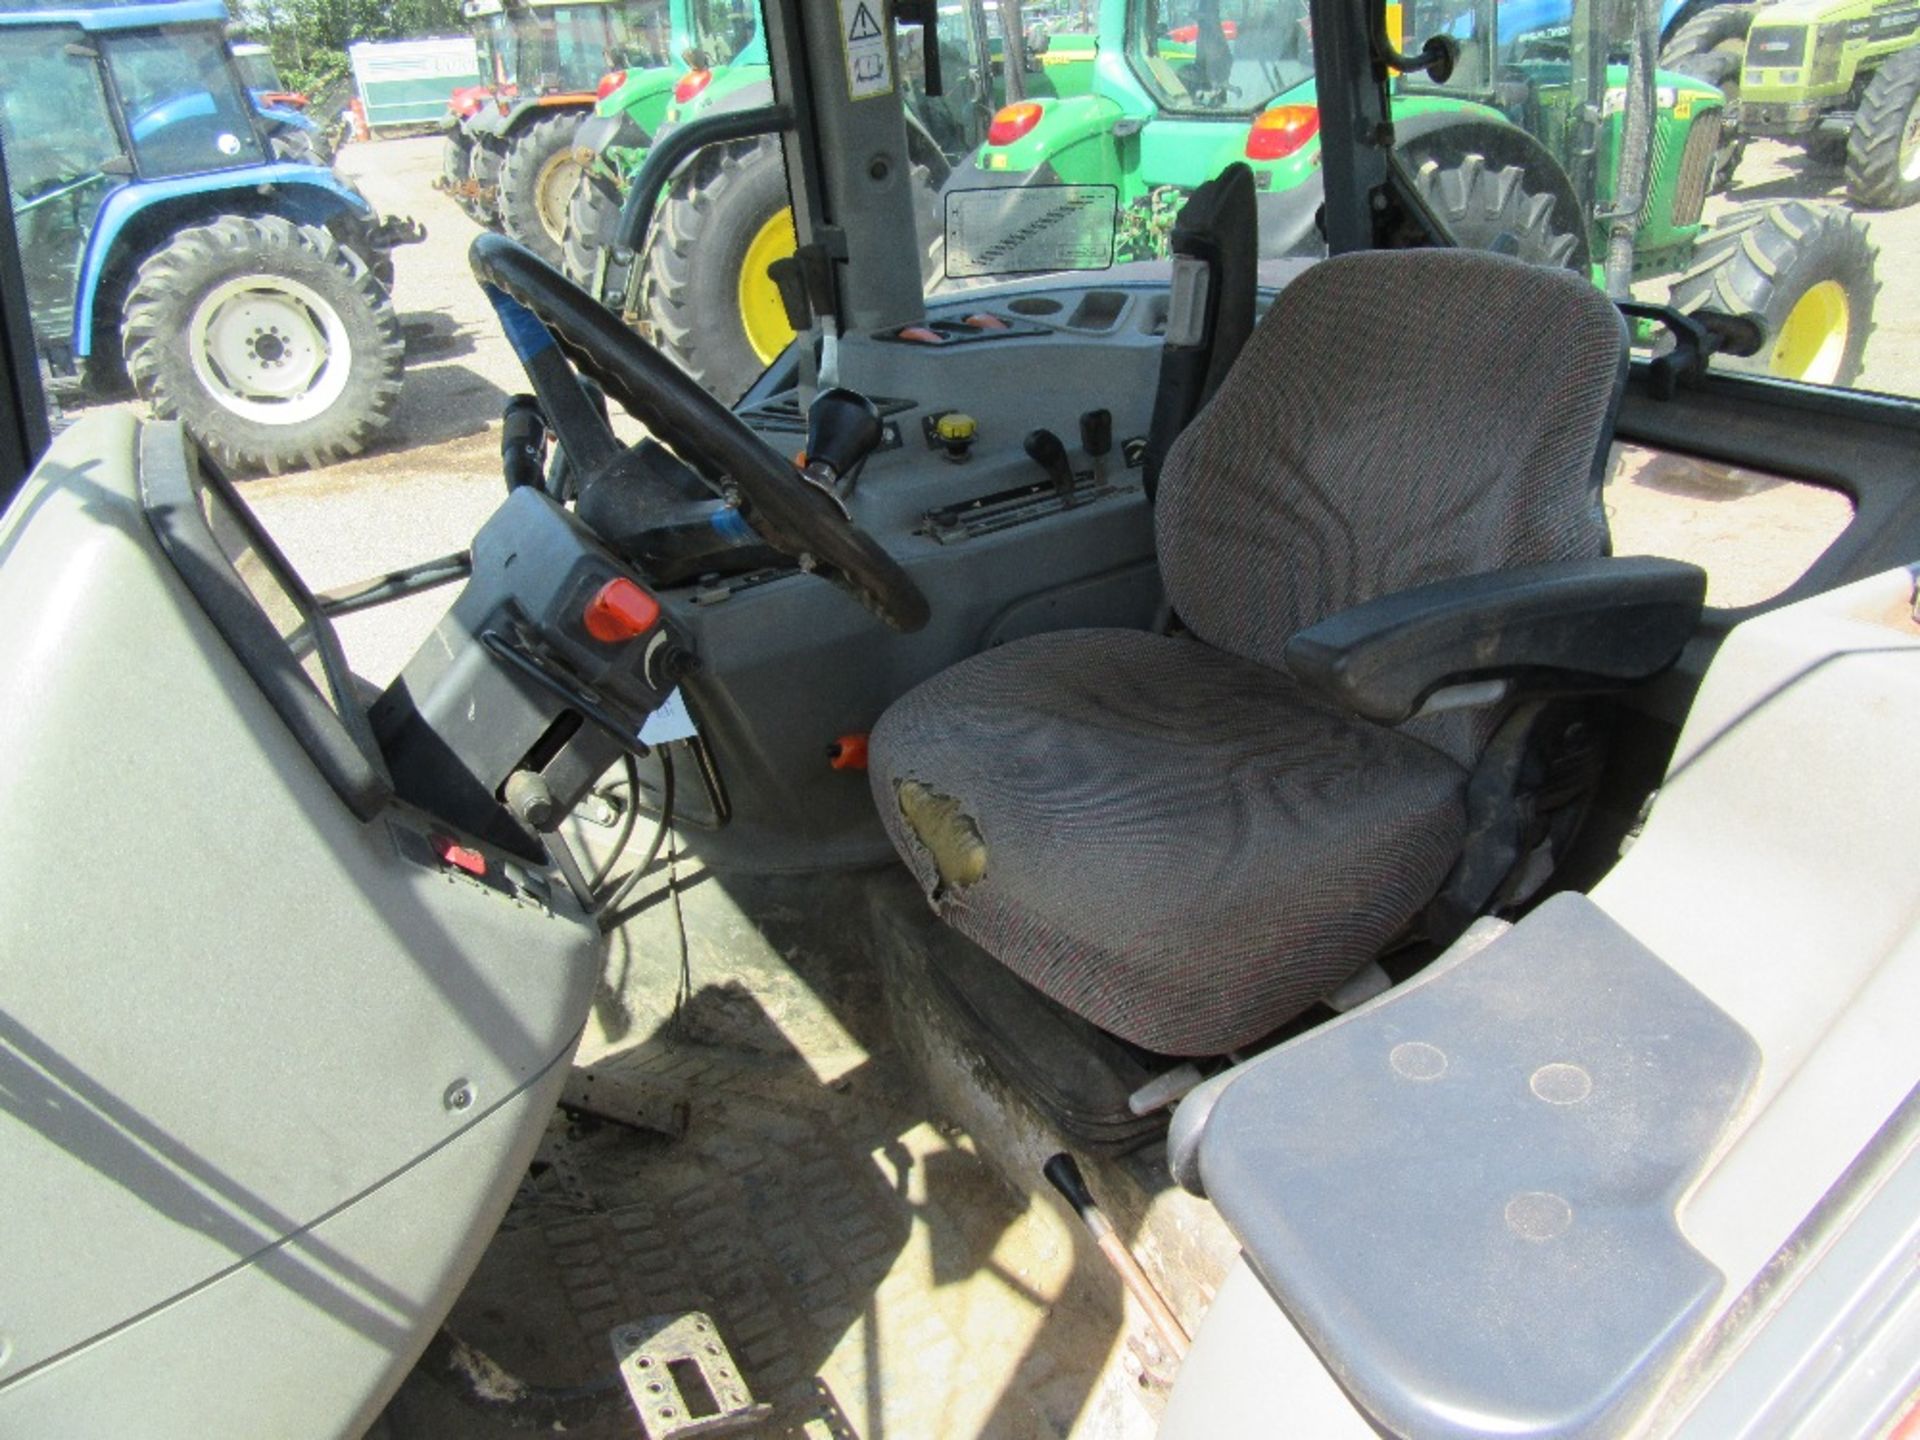 2001 Massey Ferguson 4355 Tractor With Quickie Loader. 4340 hrs. V5 will be supplied. Reg.No. FX51 - Image 8 of 13